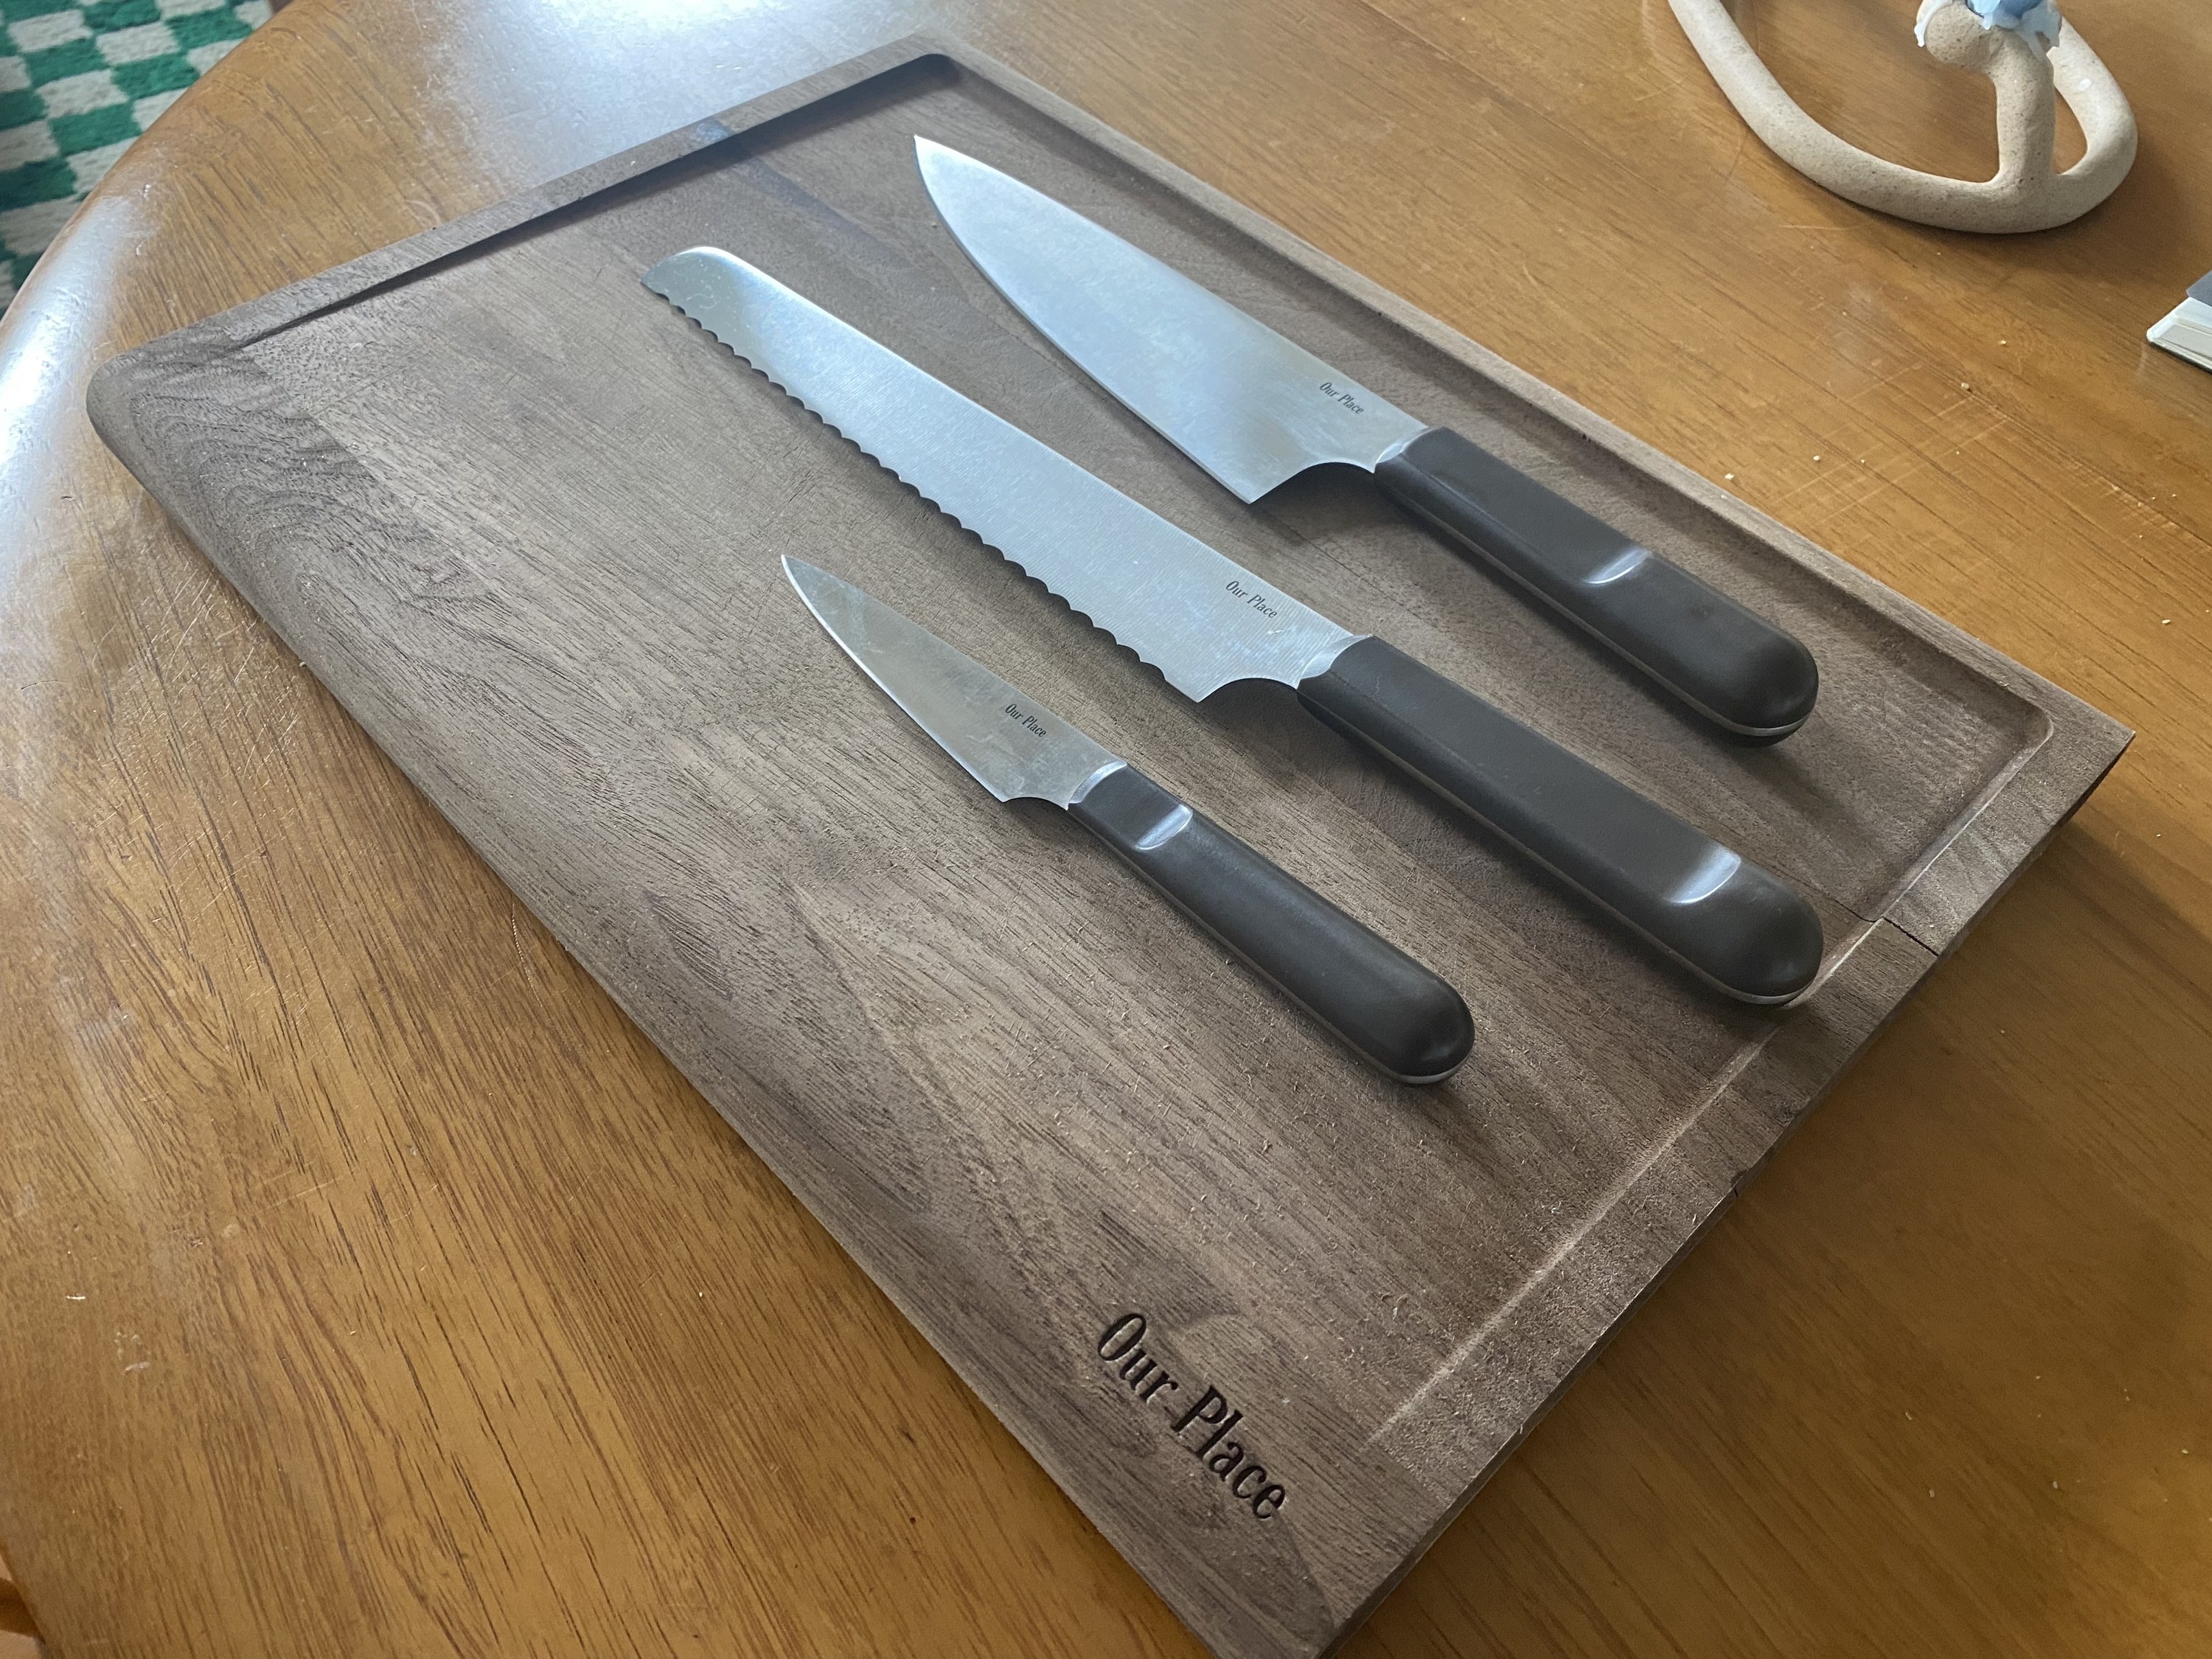 the three knives on the cutting board